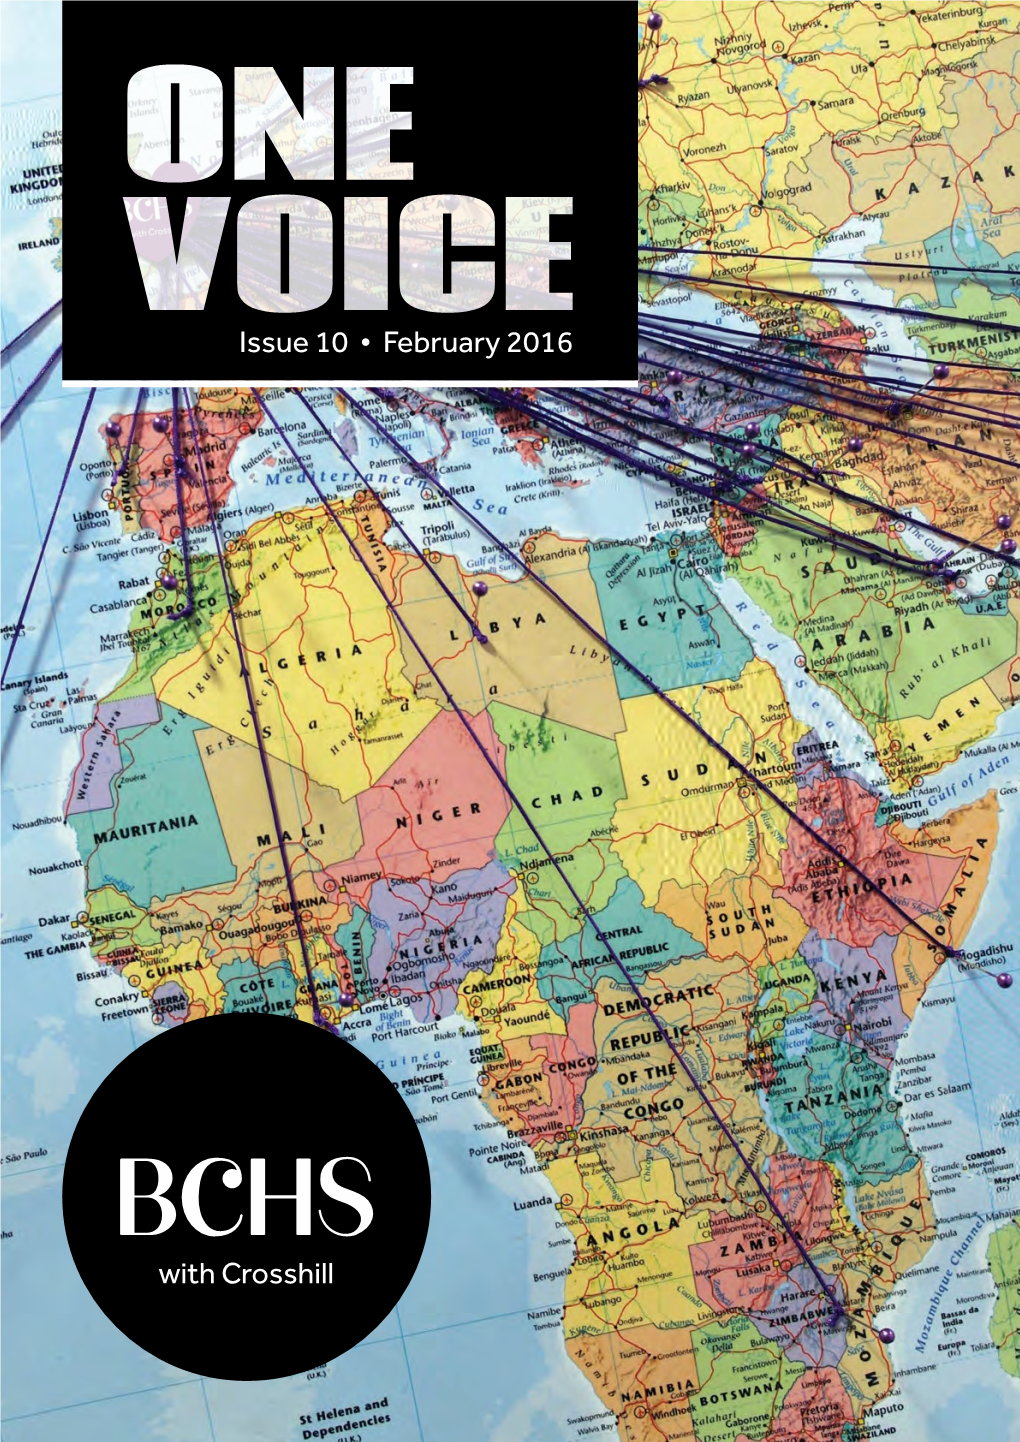 Issue 10 • February 2016 What’S Happening at BCHS with Crosshill